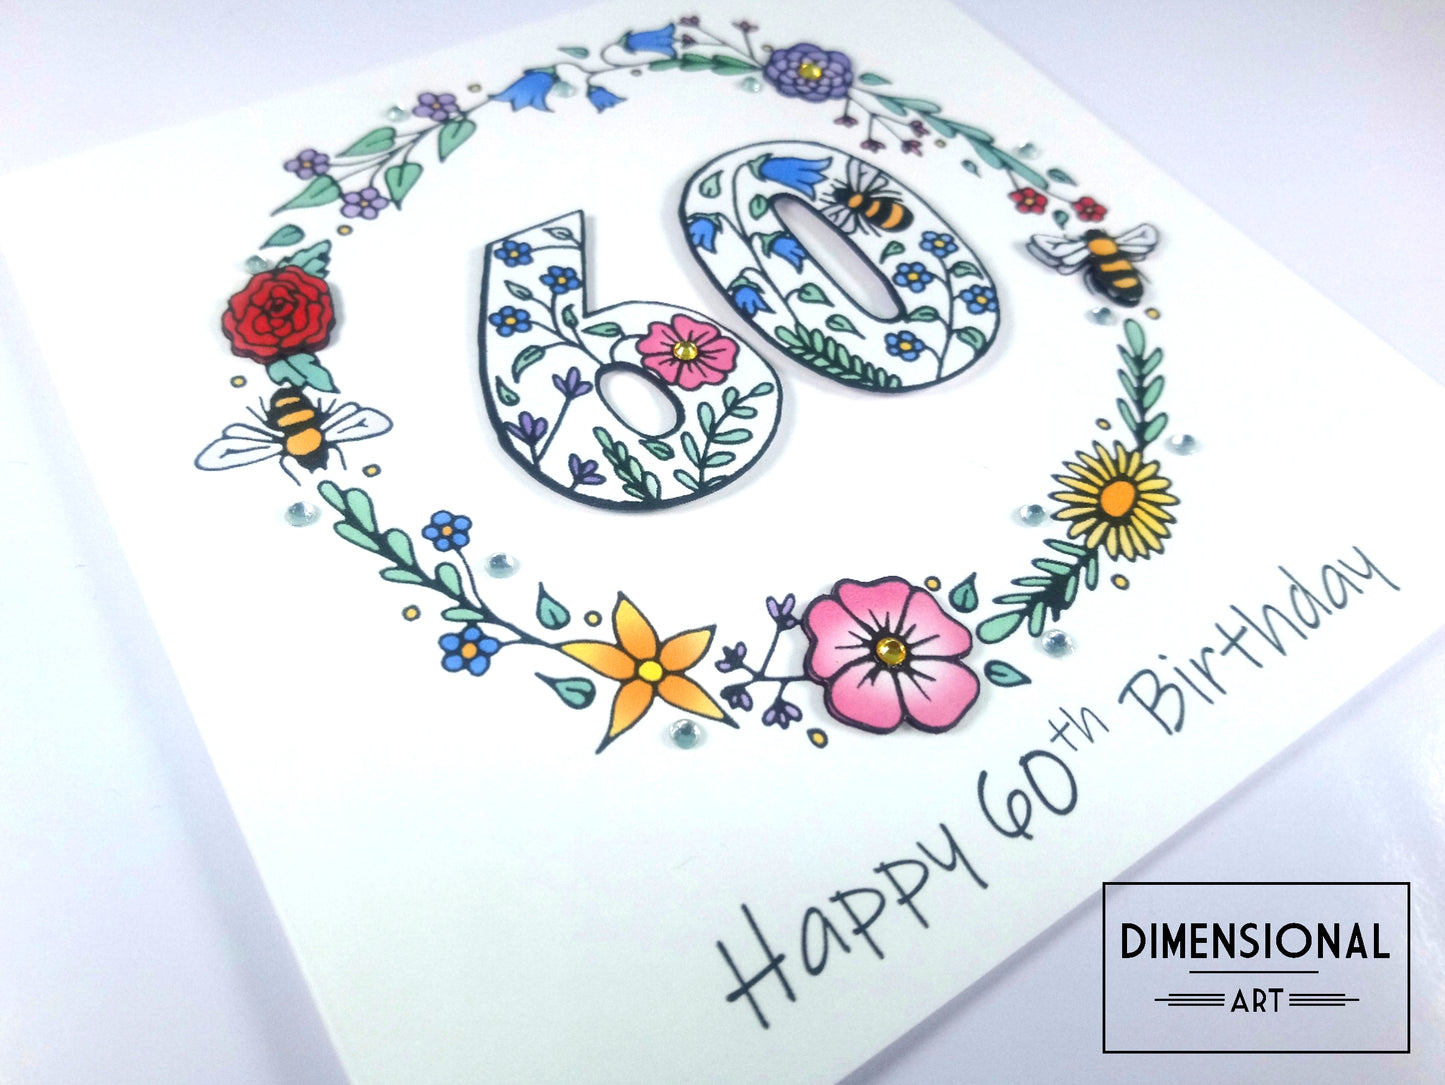 60th Flowers and Bees Birthday Card